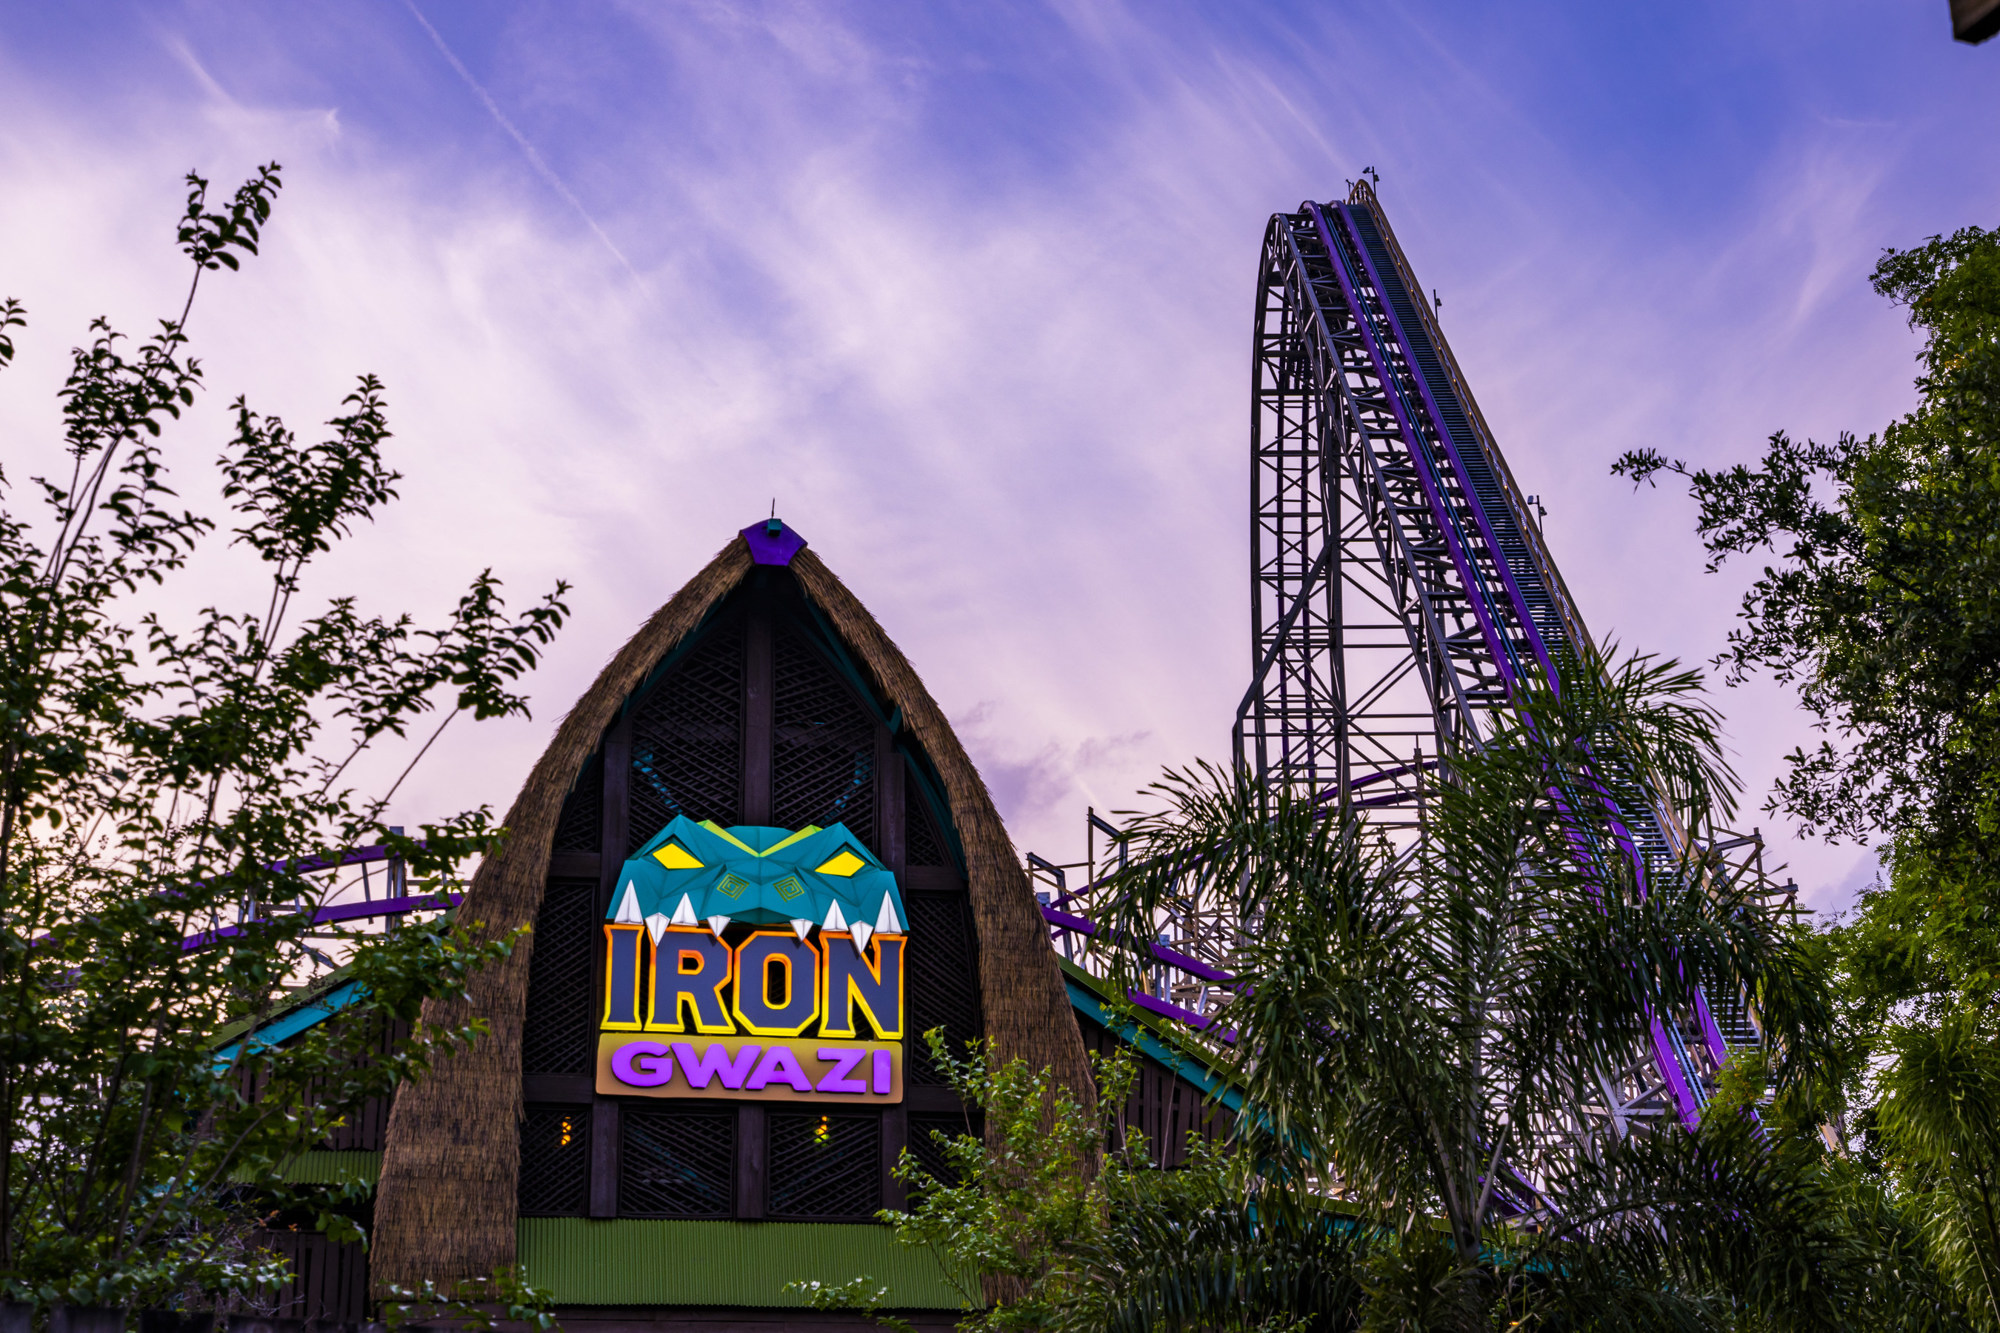 Courtesy. Iron Gwazi was built on the footprint of the original Gwazi rollercoaster and incorporates some of its wood frame.